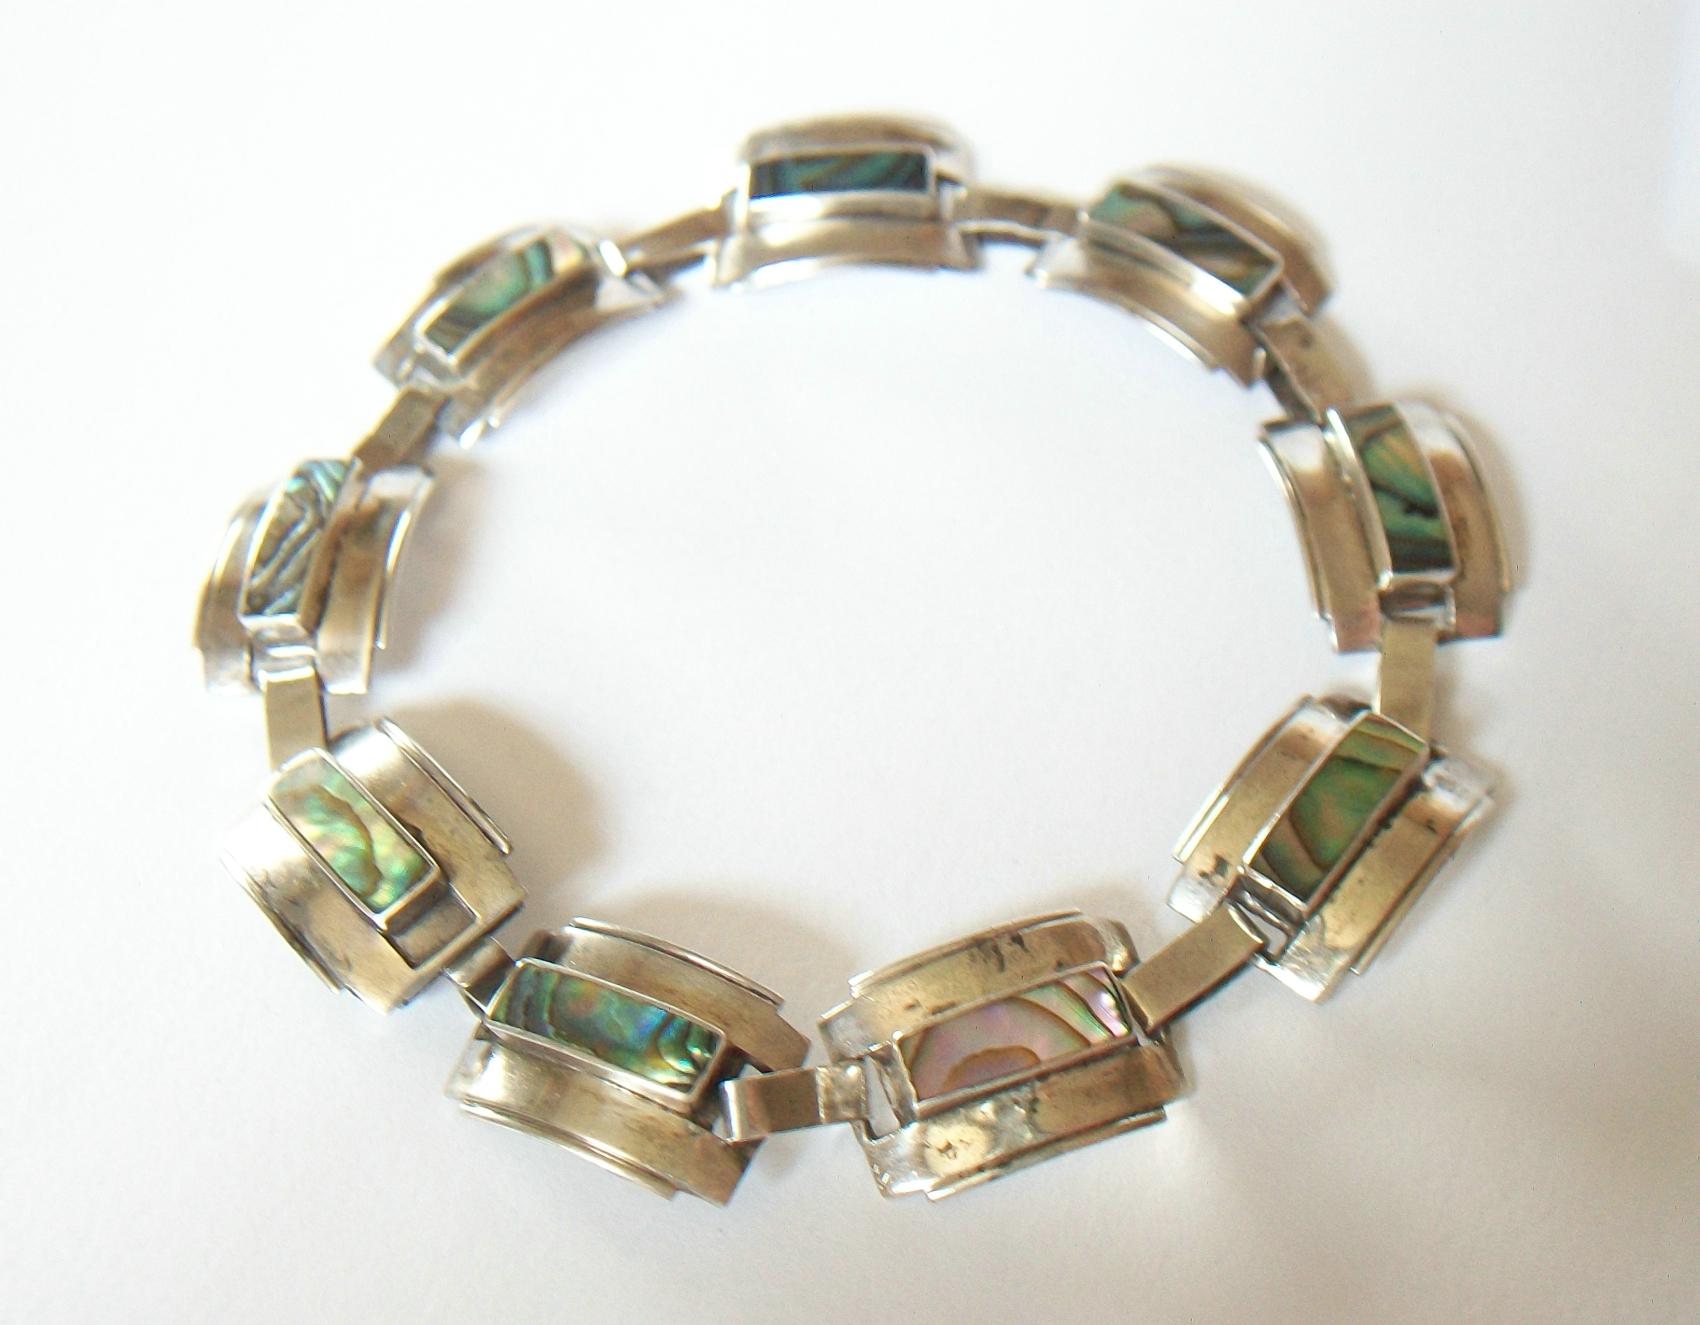 Modernist Sterling Silver & Abalone Link Bracelet - Mexico - Circa 1950's For Sale 1